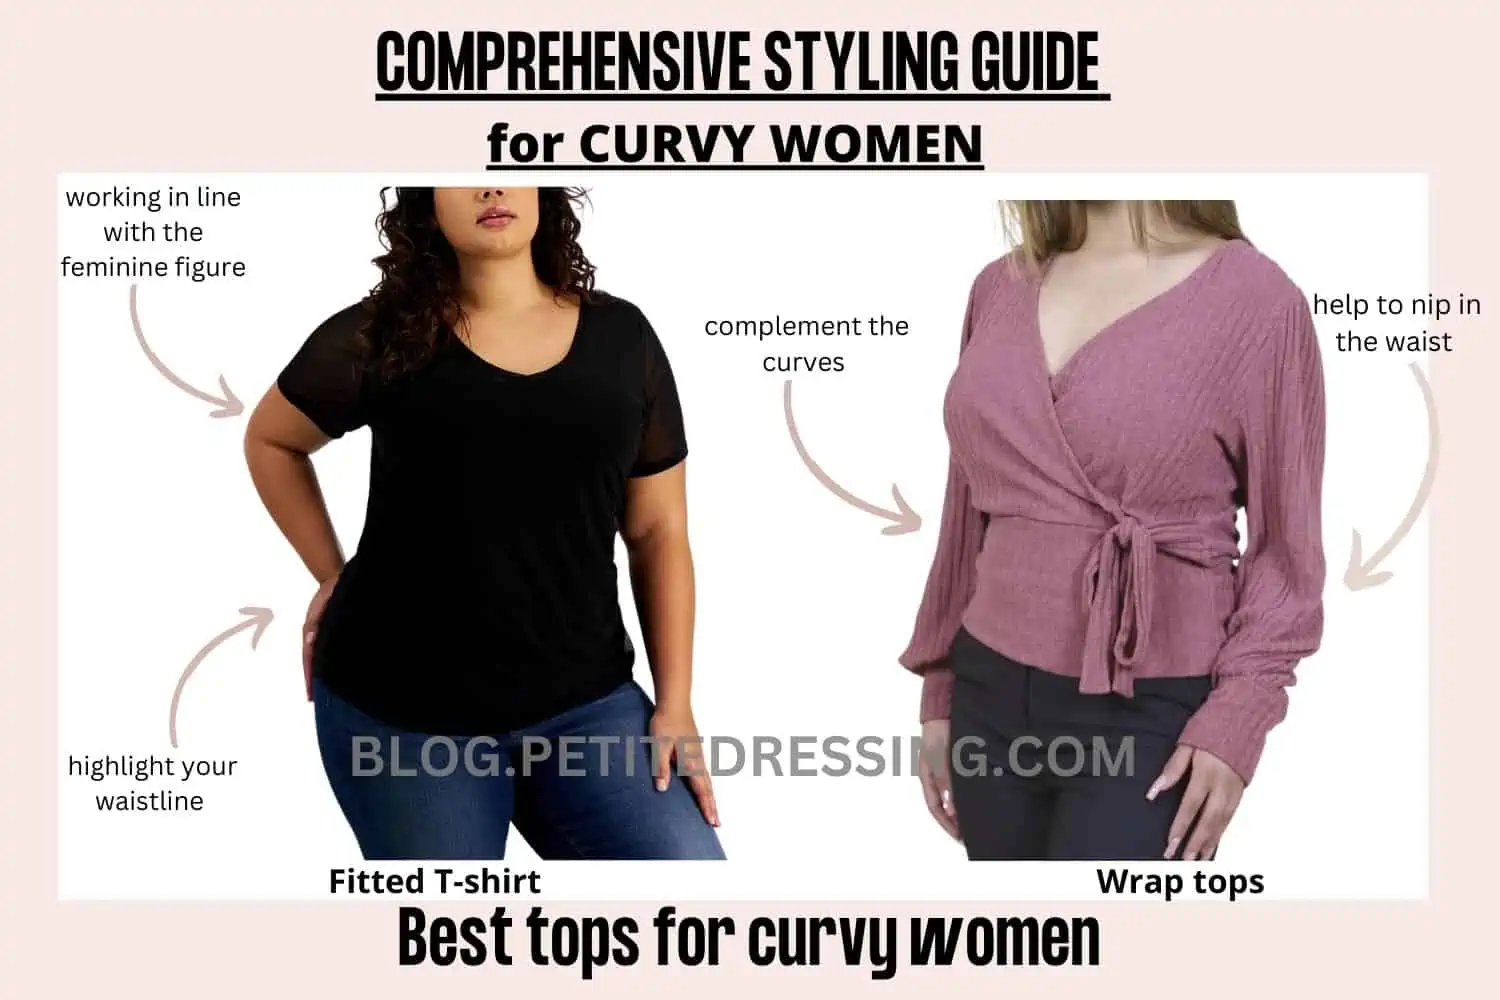 A Curvy Woman's Guide's  Page